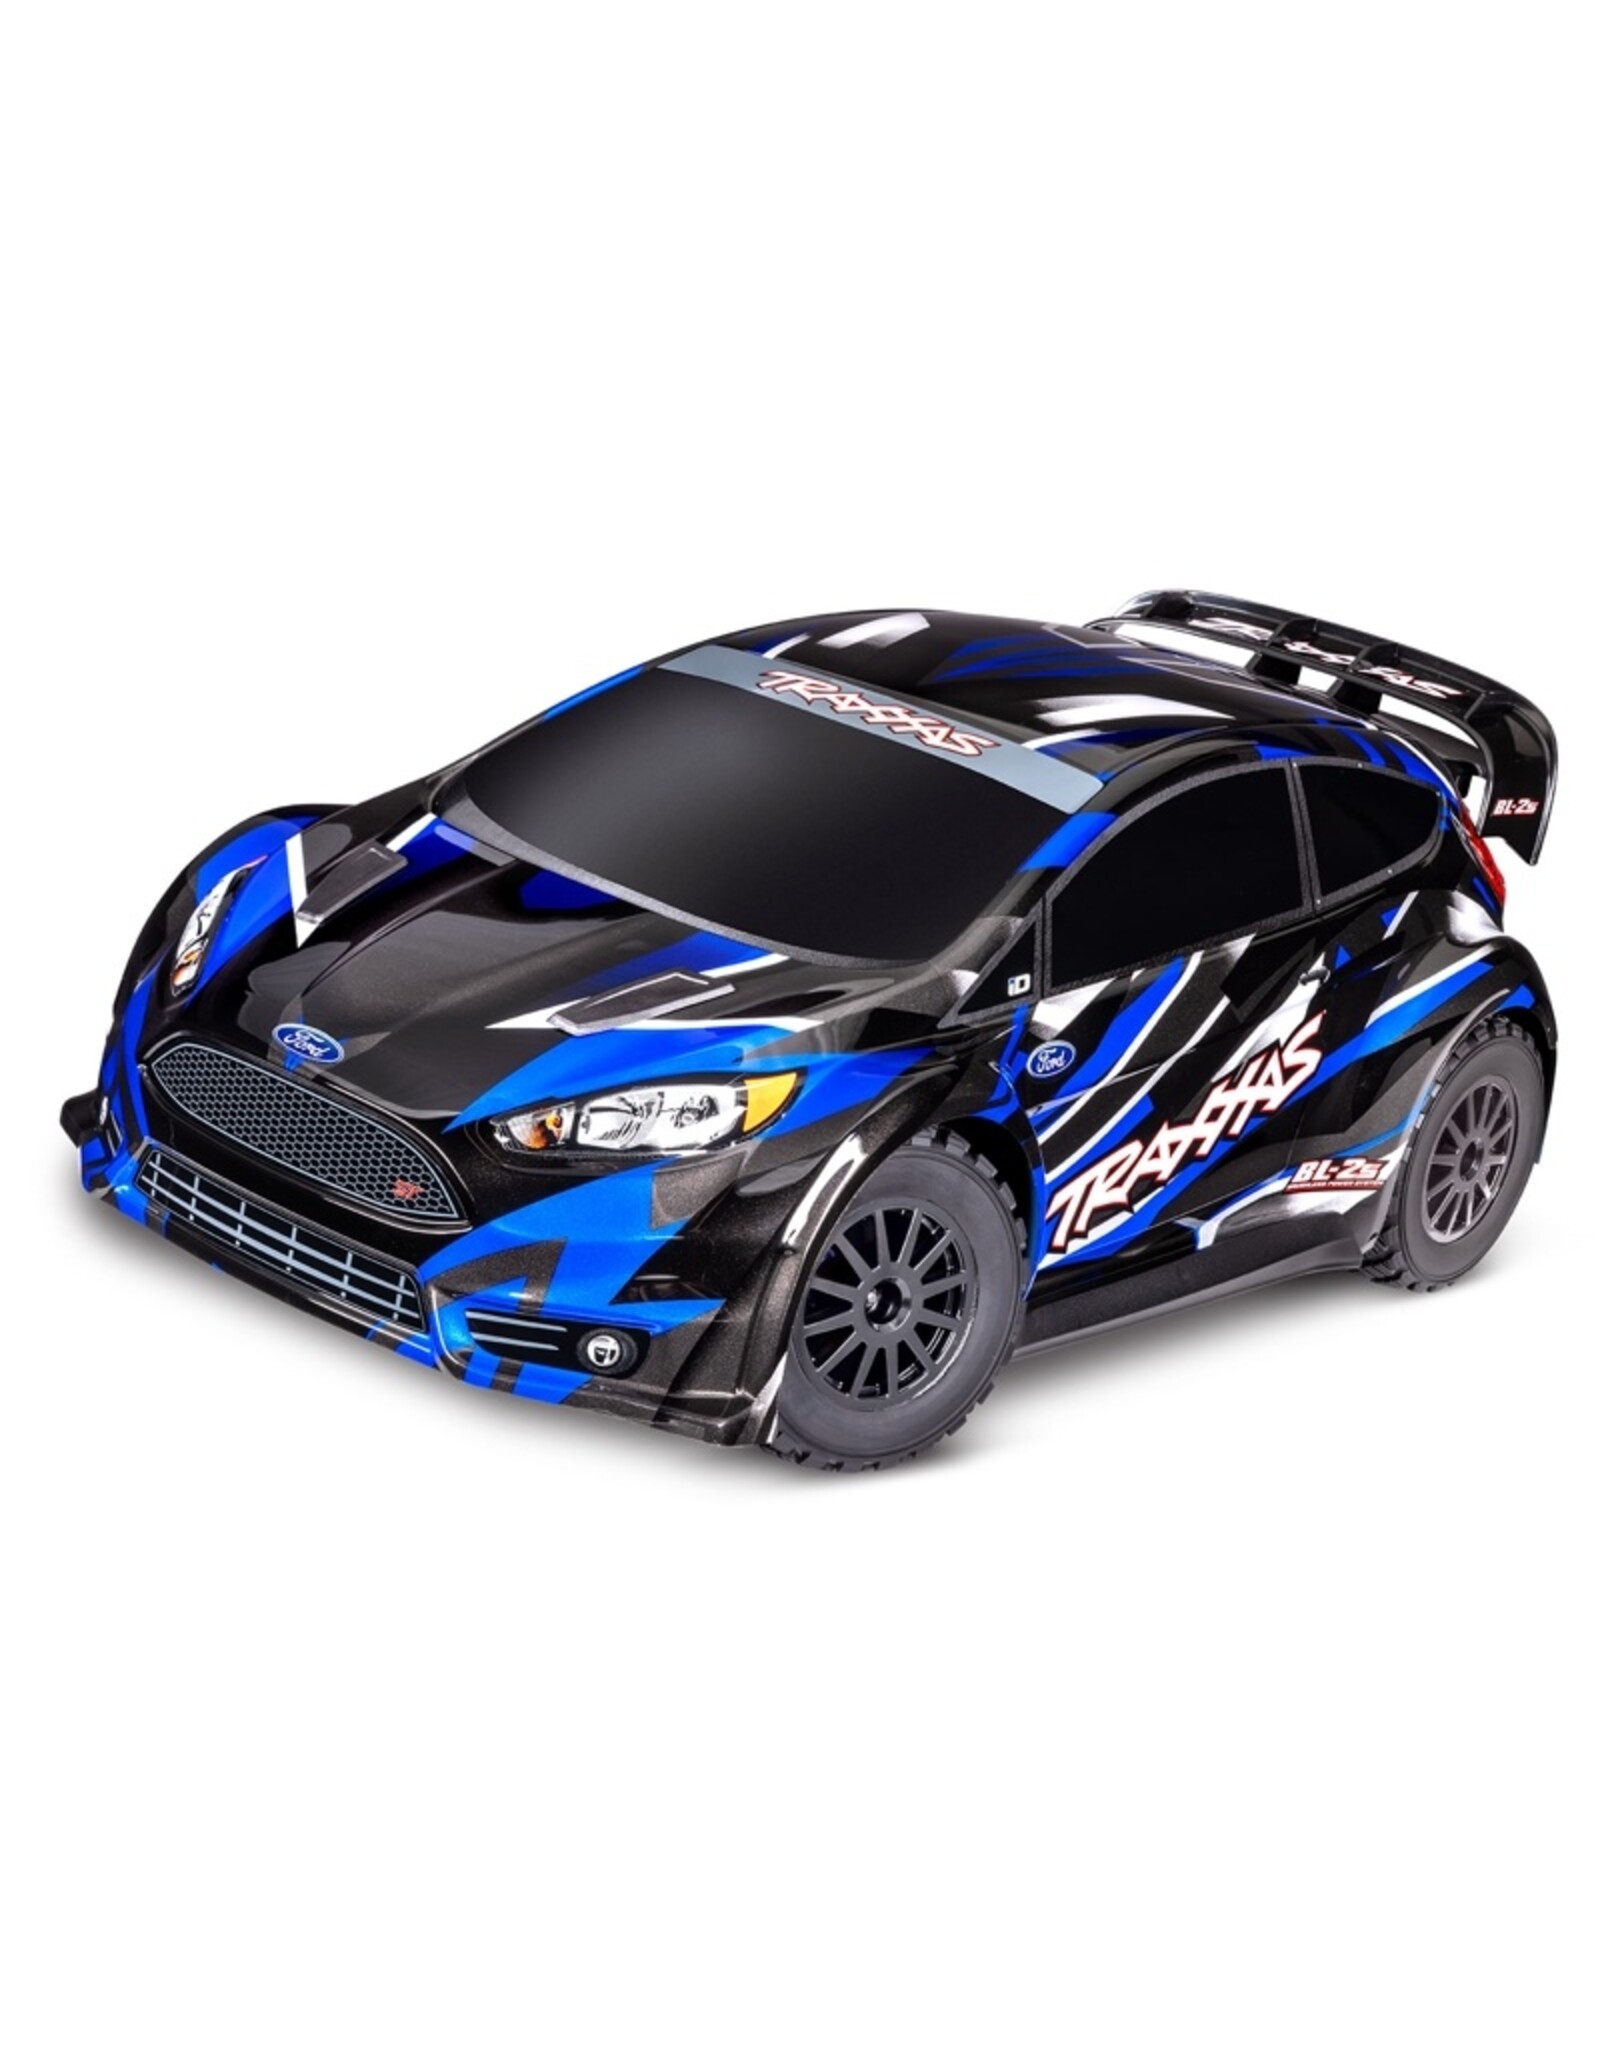 Traxxas TRA74154-4 Ford Fiesta ST Rally BL-2s BLUE